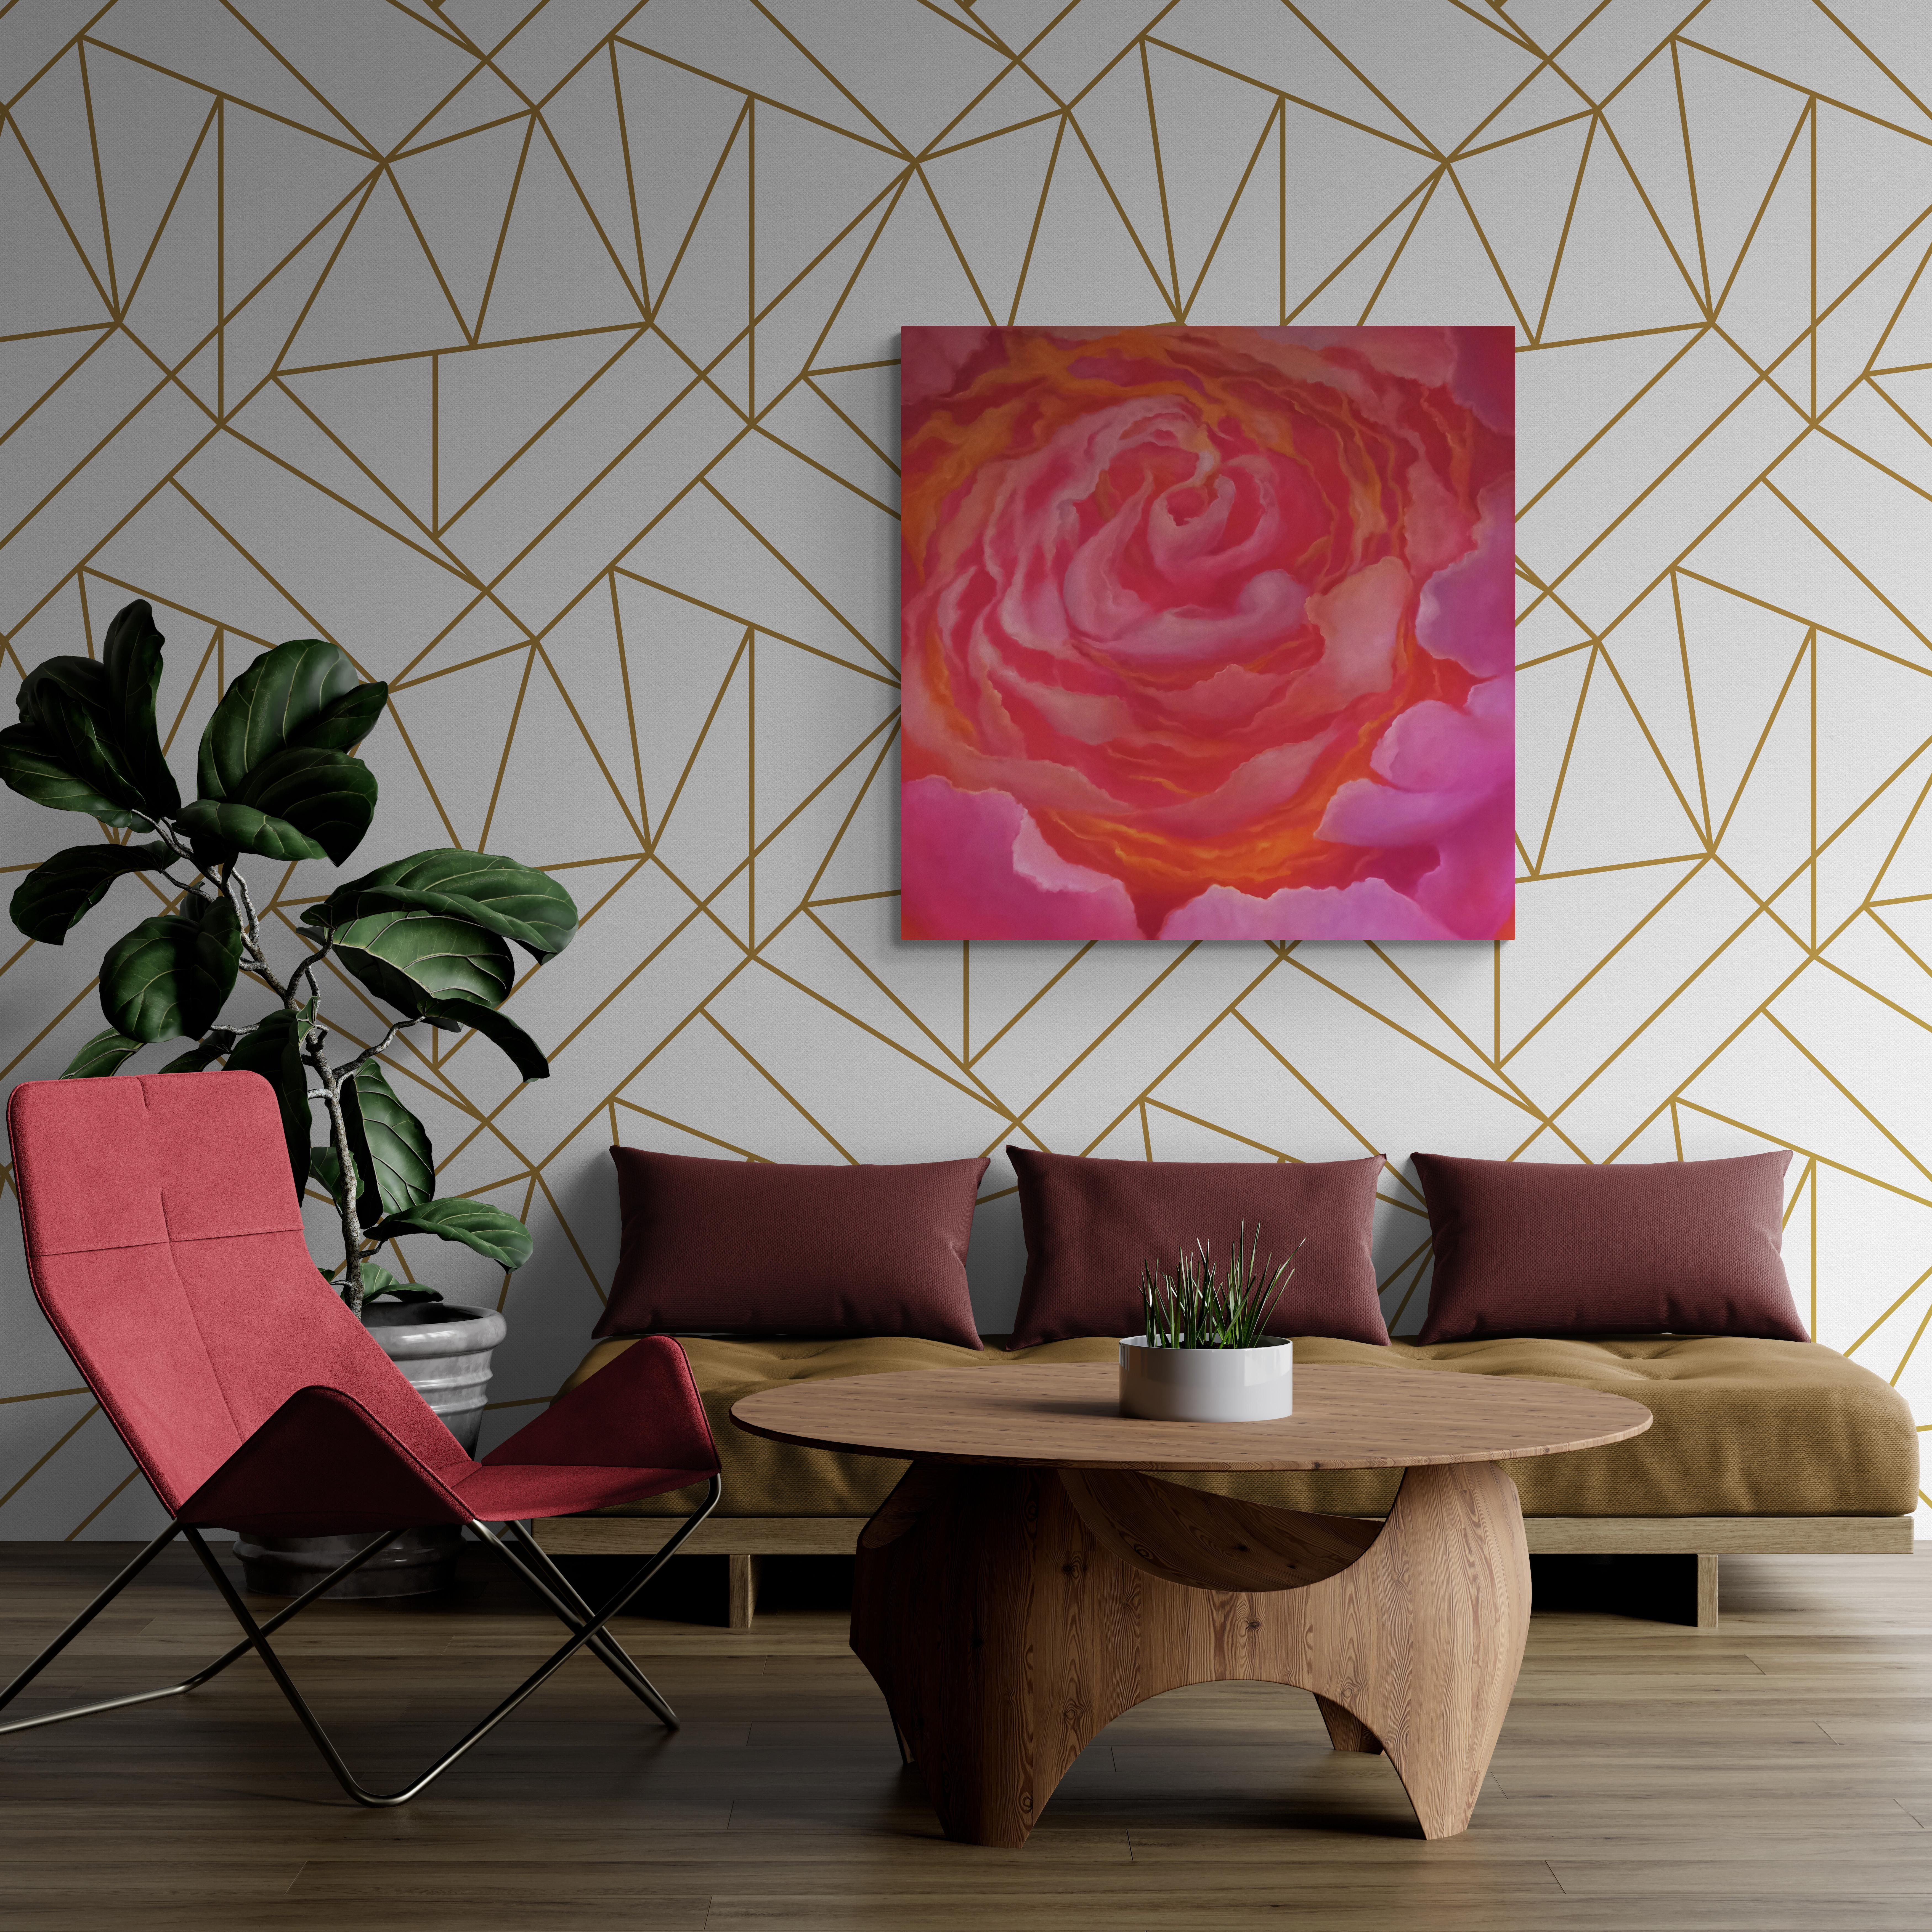 Rose Dorè, Contemporary Signed Original Pink Rose Flower Oil Painting on Canvas 8